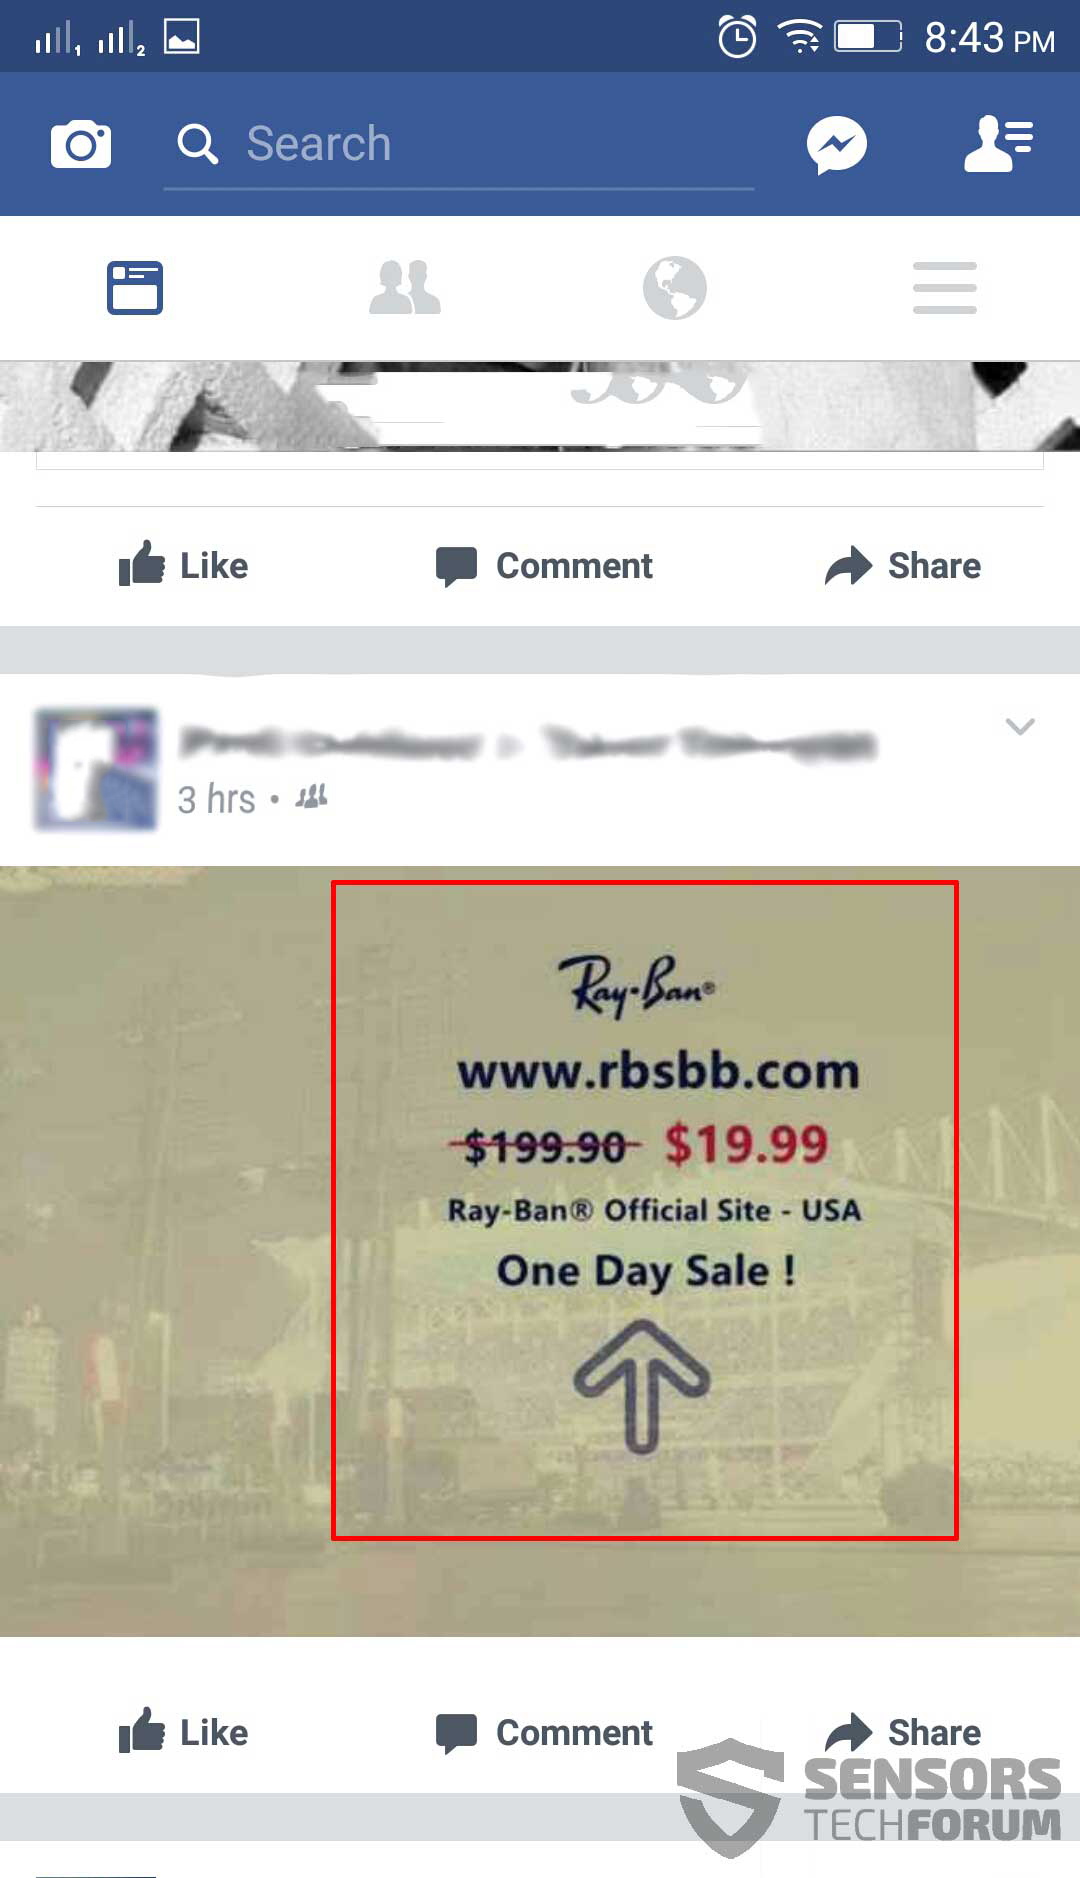 ray ban 19.99 one day sale